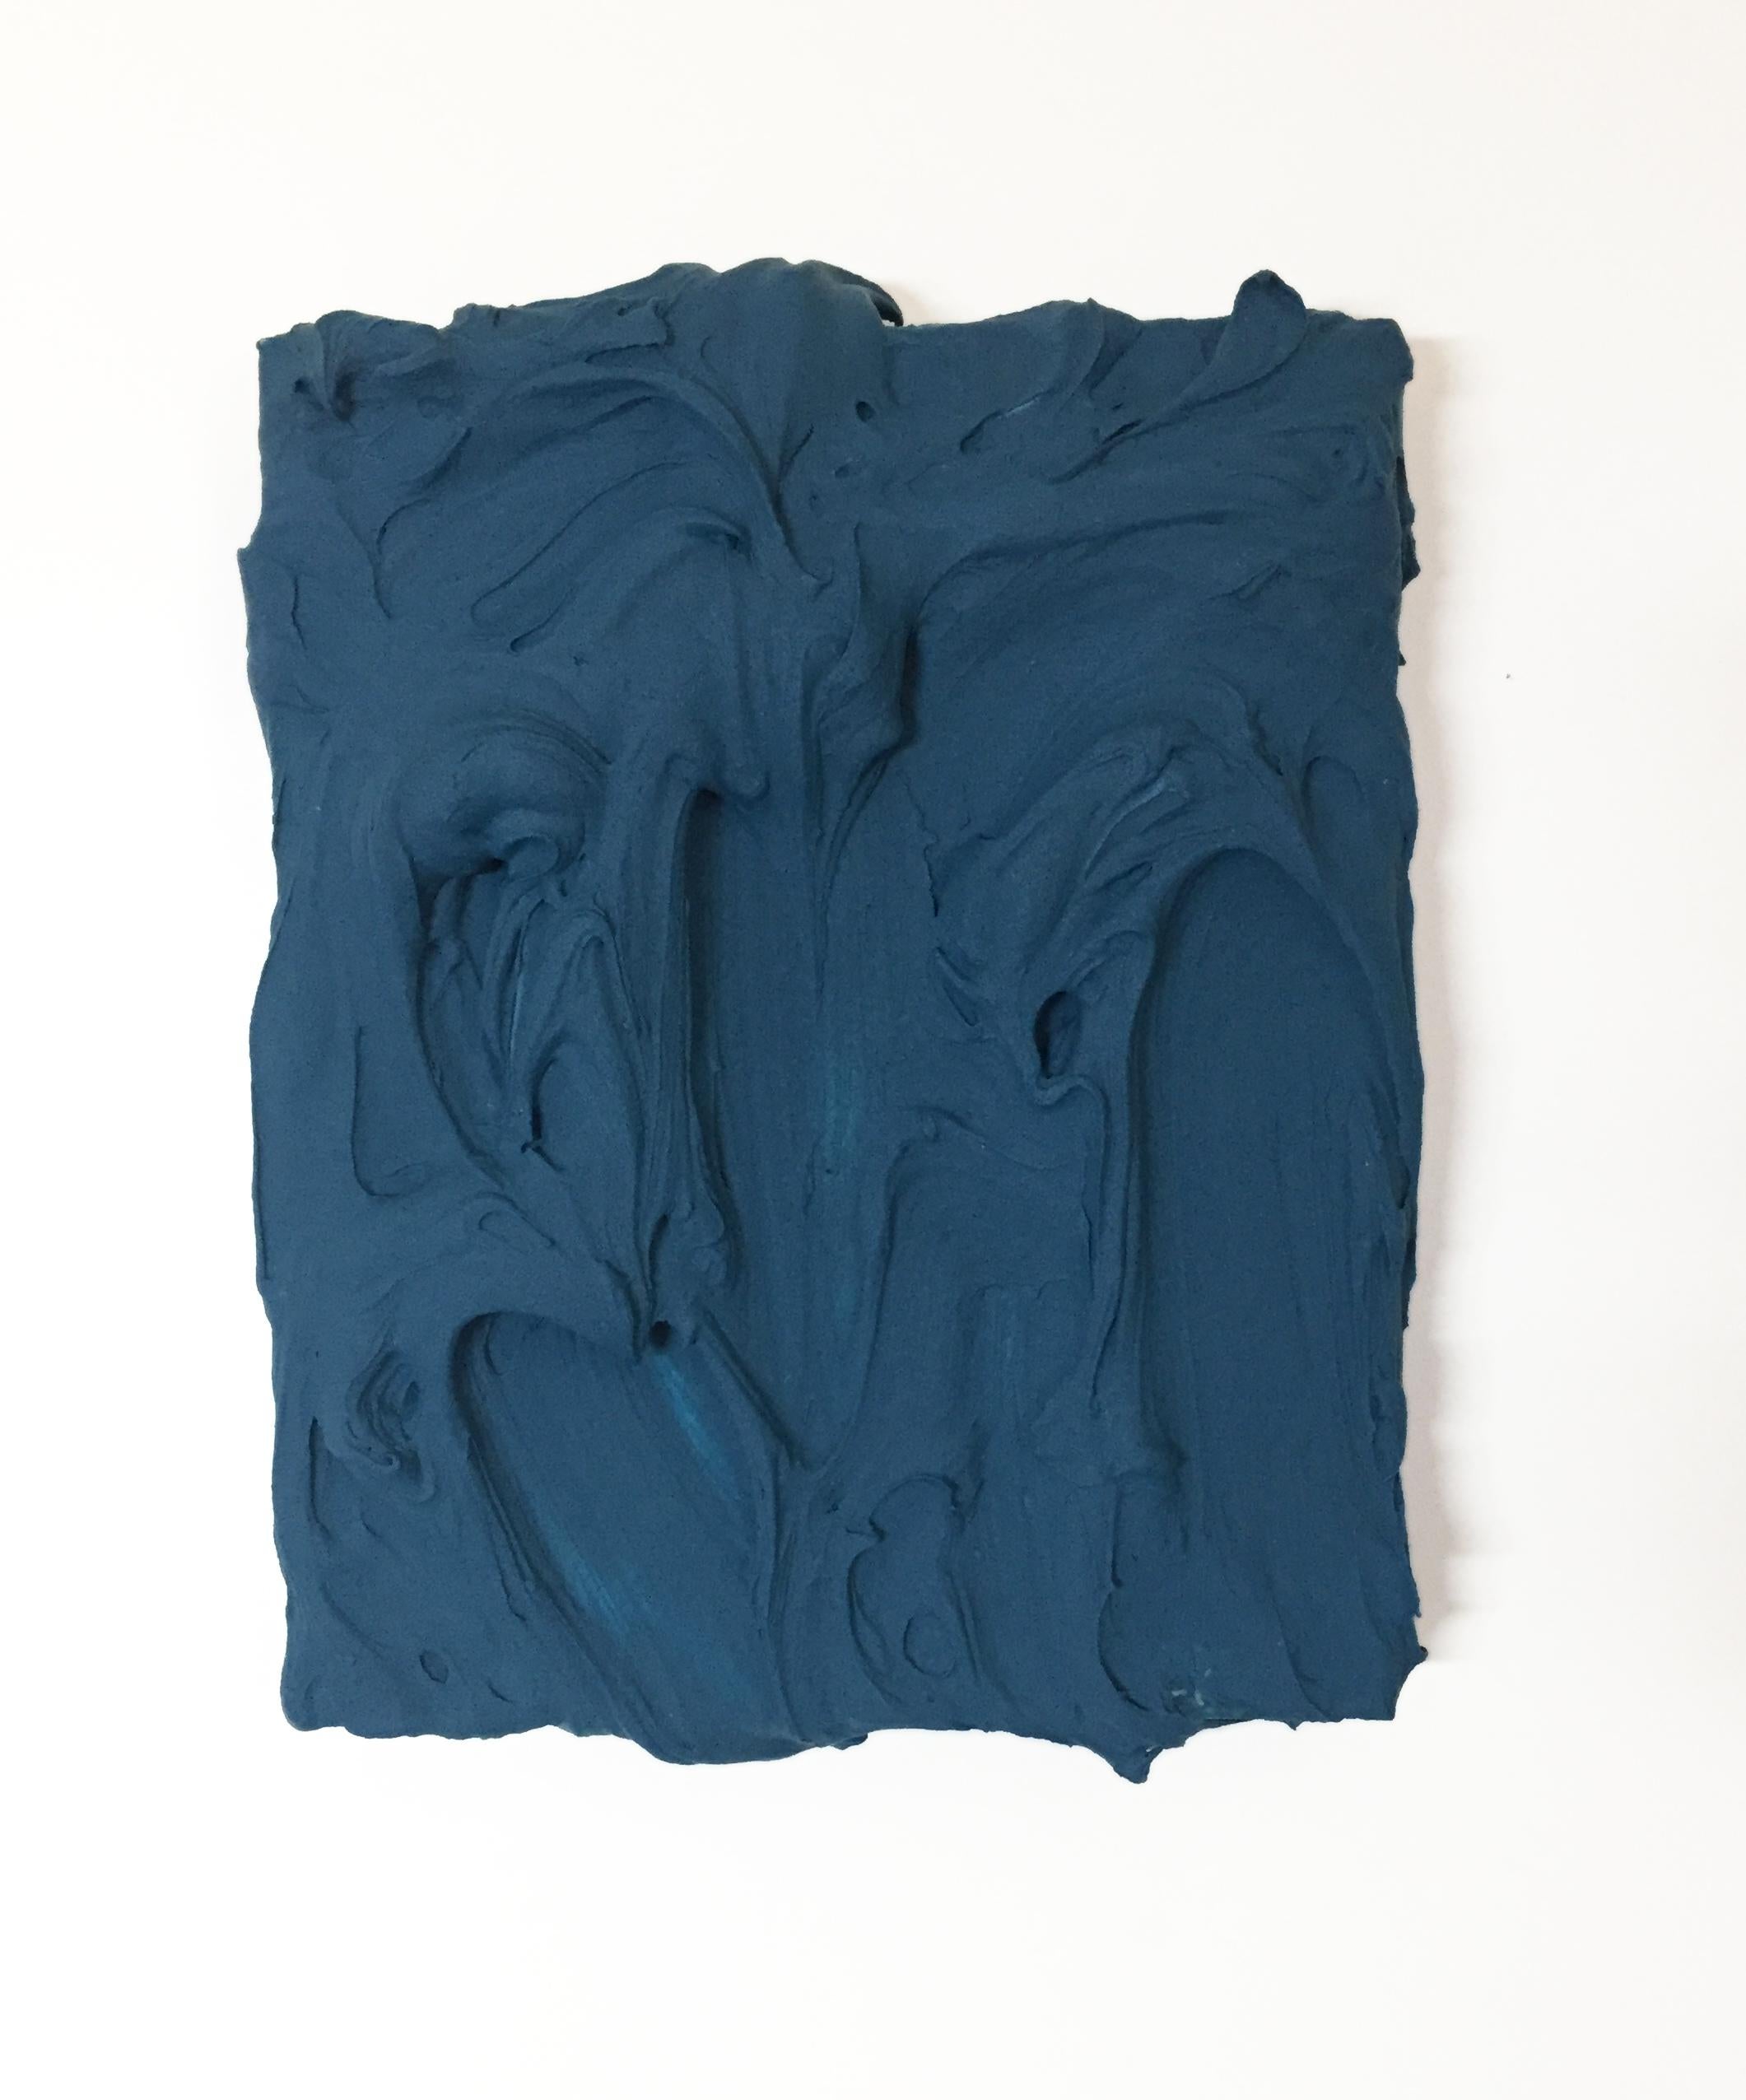 Chloe Hedden Abstract Sculpture - Deep Teal Excess (impasto texture thick painting monochrome pop bold design)